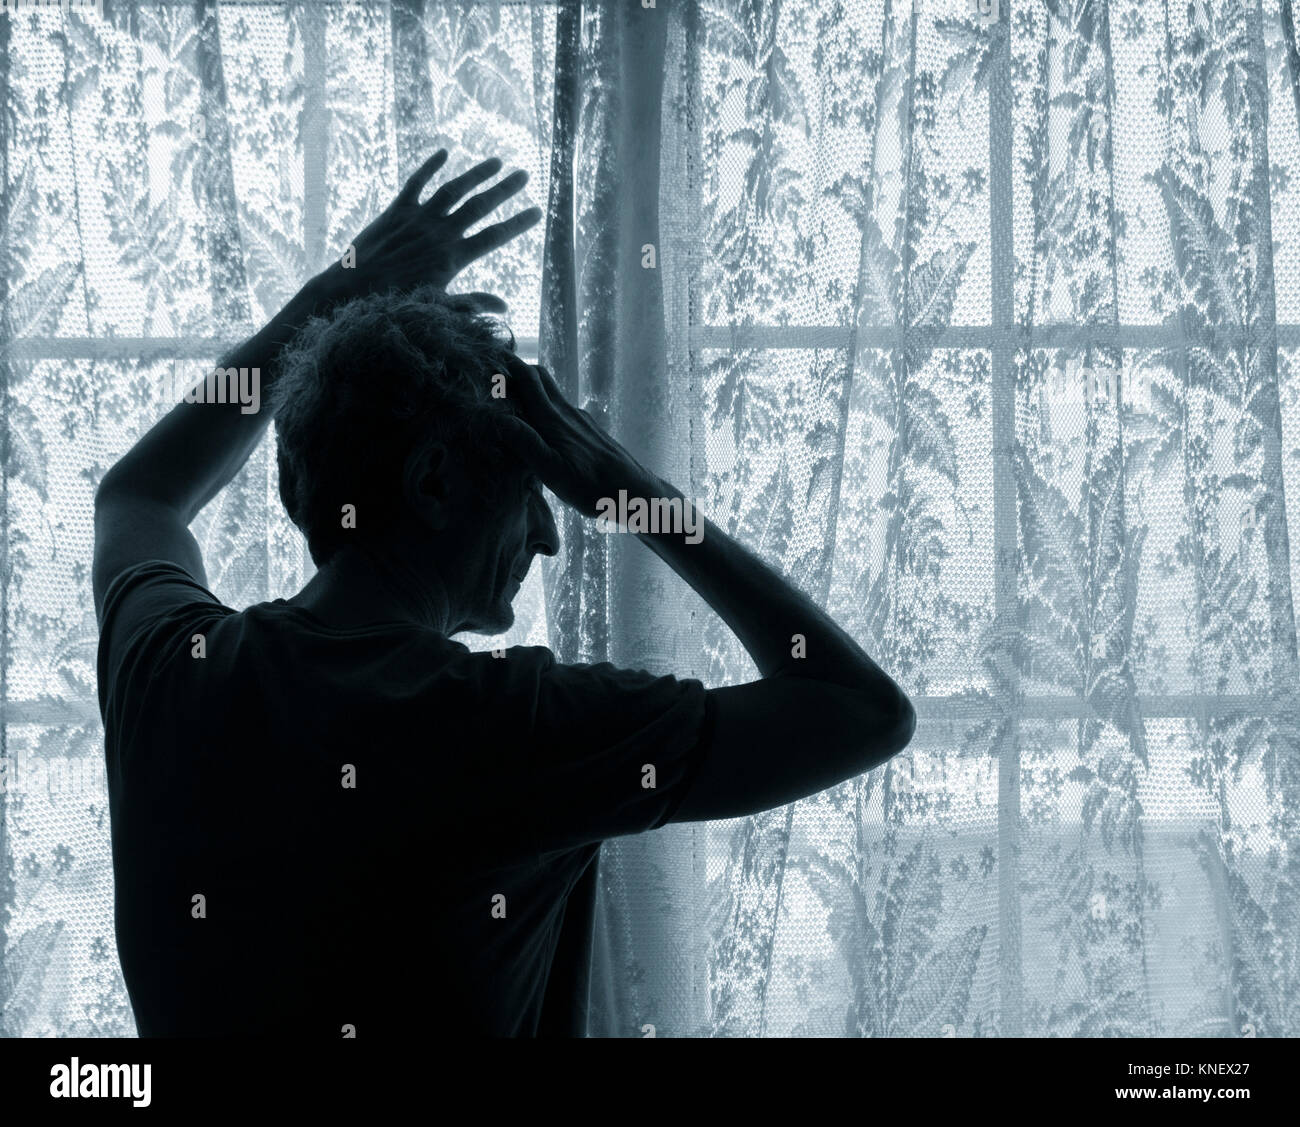 Mature man with hand on head near window. Concept image for depression, male depression, mental health, male suicide... Stock Photo